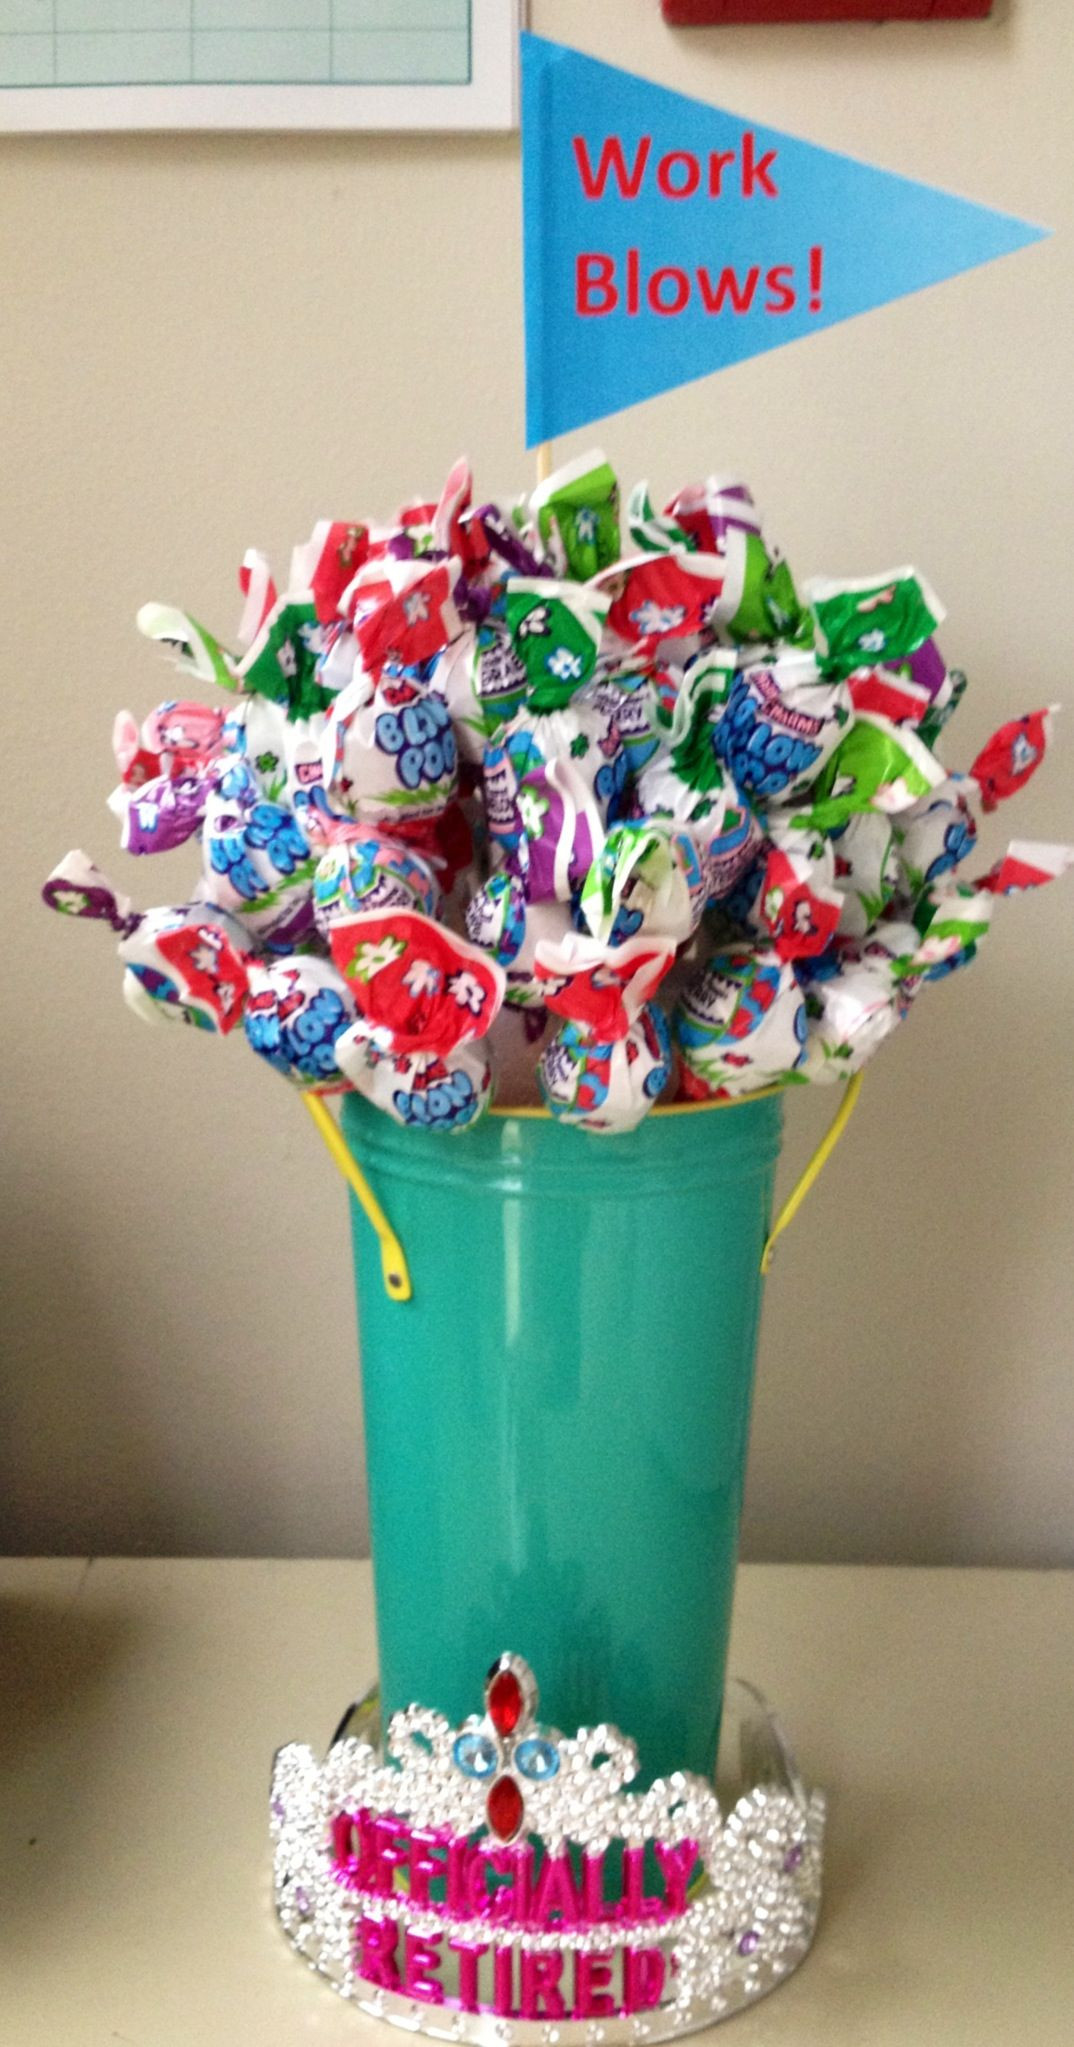 Work Retirement Party Ideas
 Retirement t Blow pops and a "work blows" sign